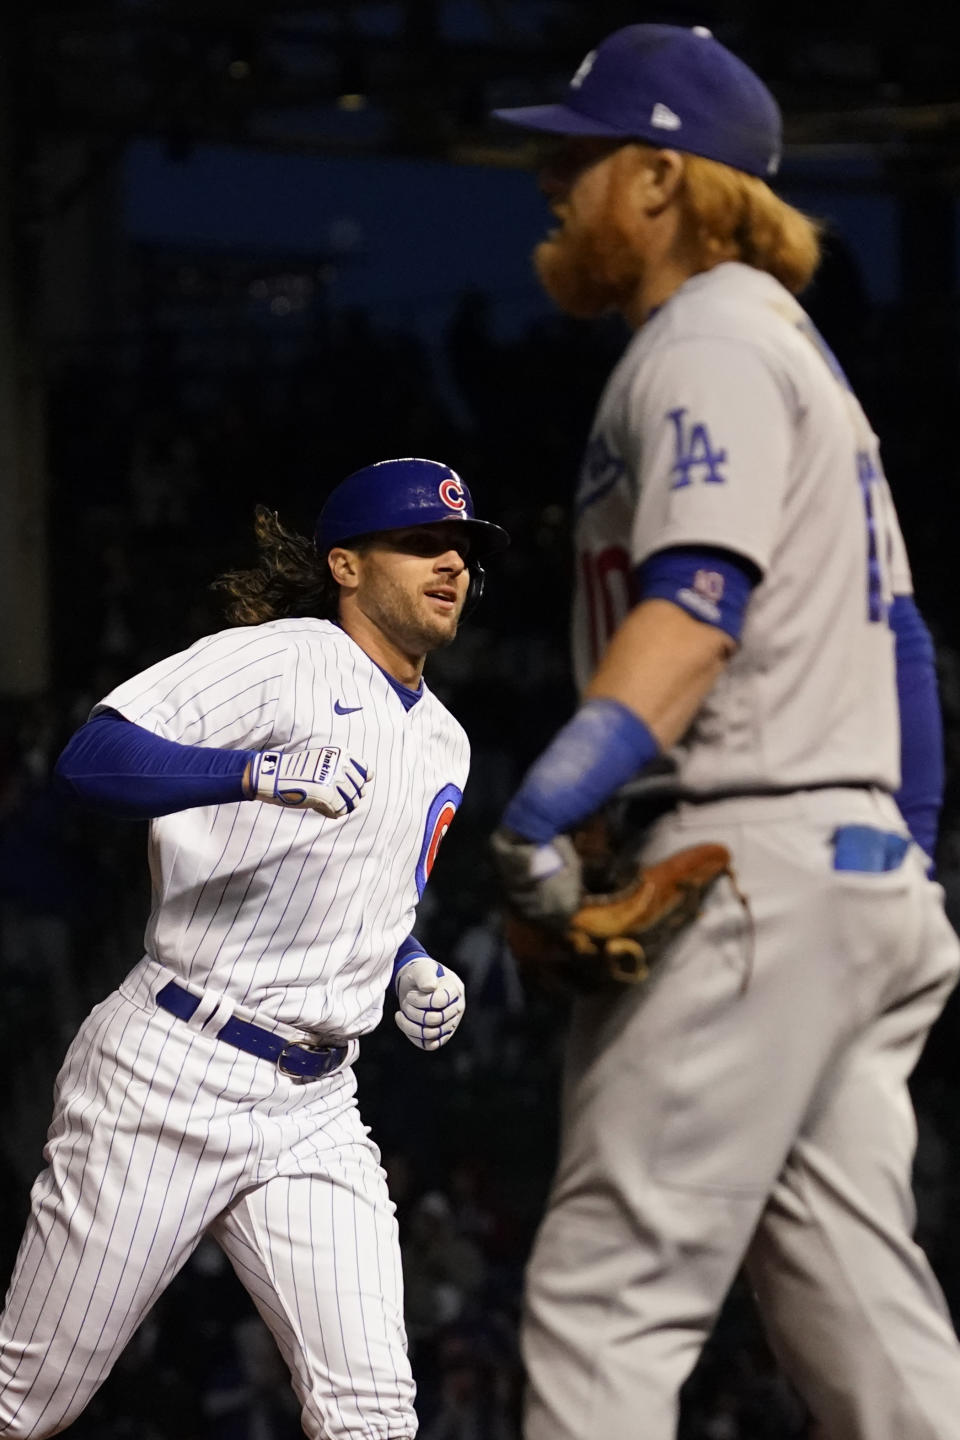 Chicago Cubs' Jake Marisnick, left, rounds the bases after his two-run home run as Los Angeles Dodgers third baseman Justin Turner looks at the score board during the fifth inning of a baseball game in Chicago, Wednesday, May 5, 2021. (AP Photo/Nam Y. Huh)